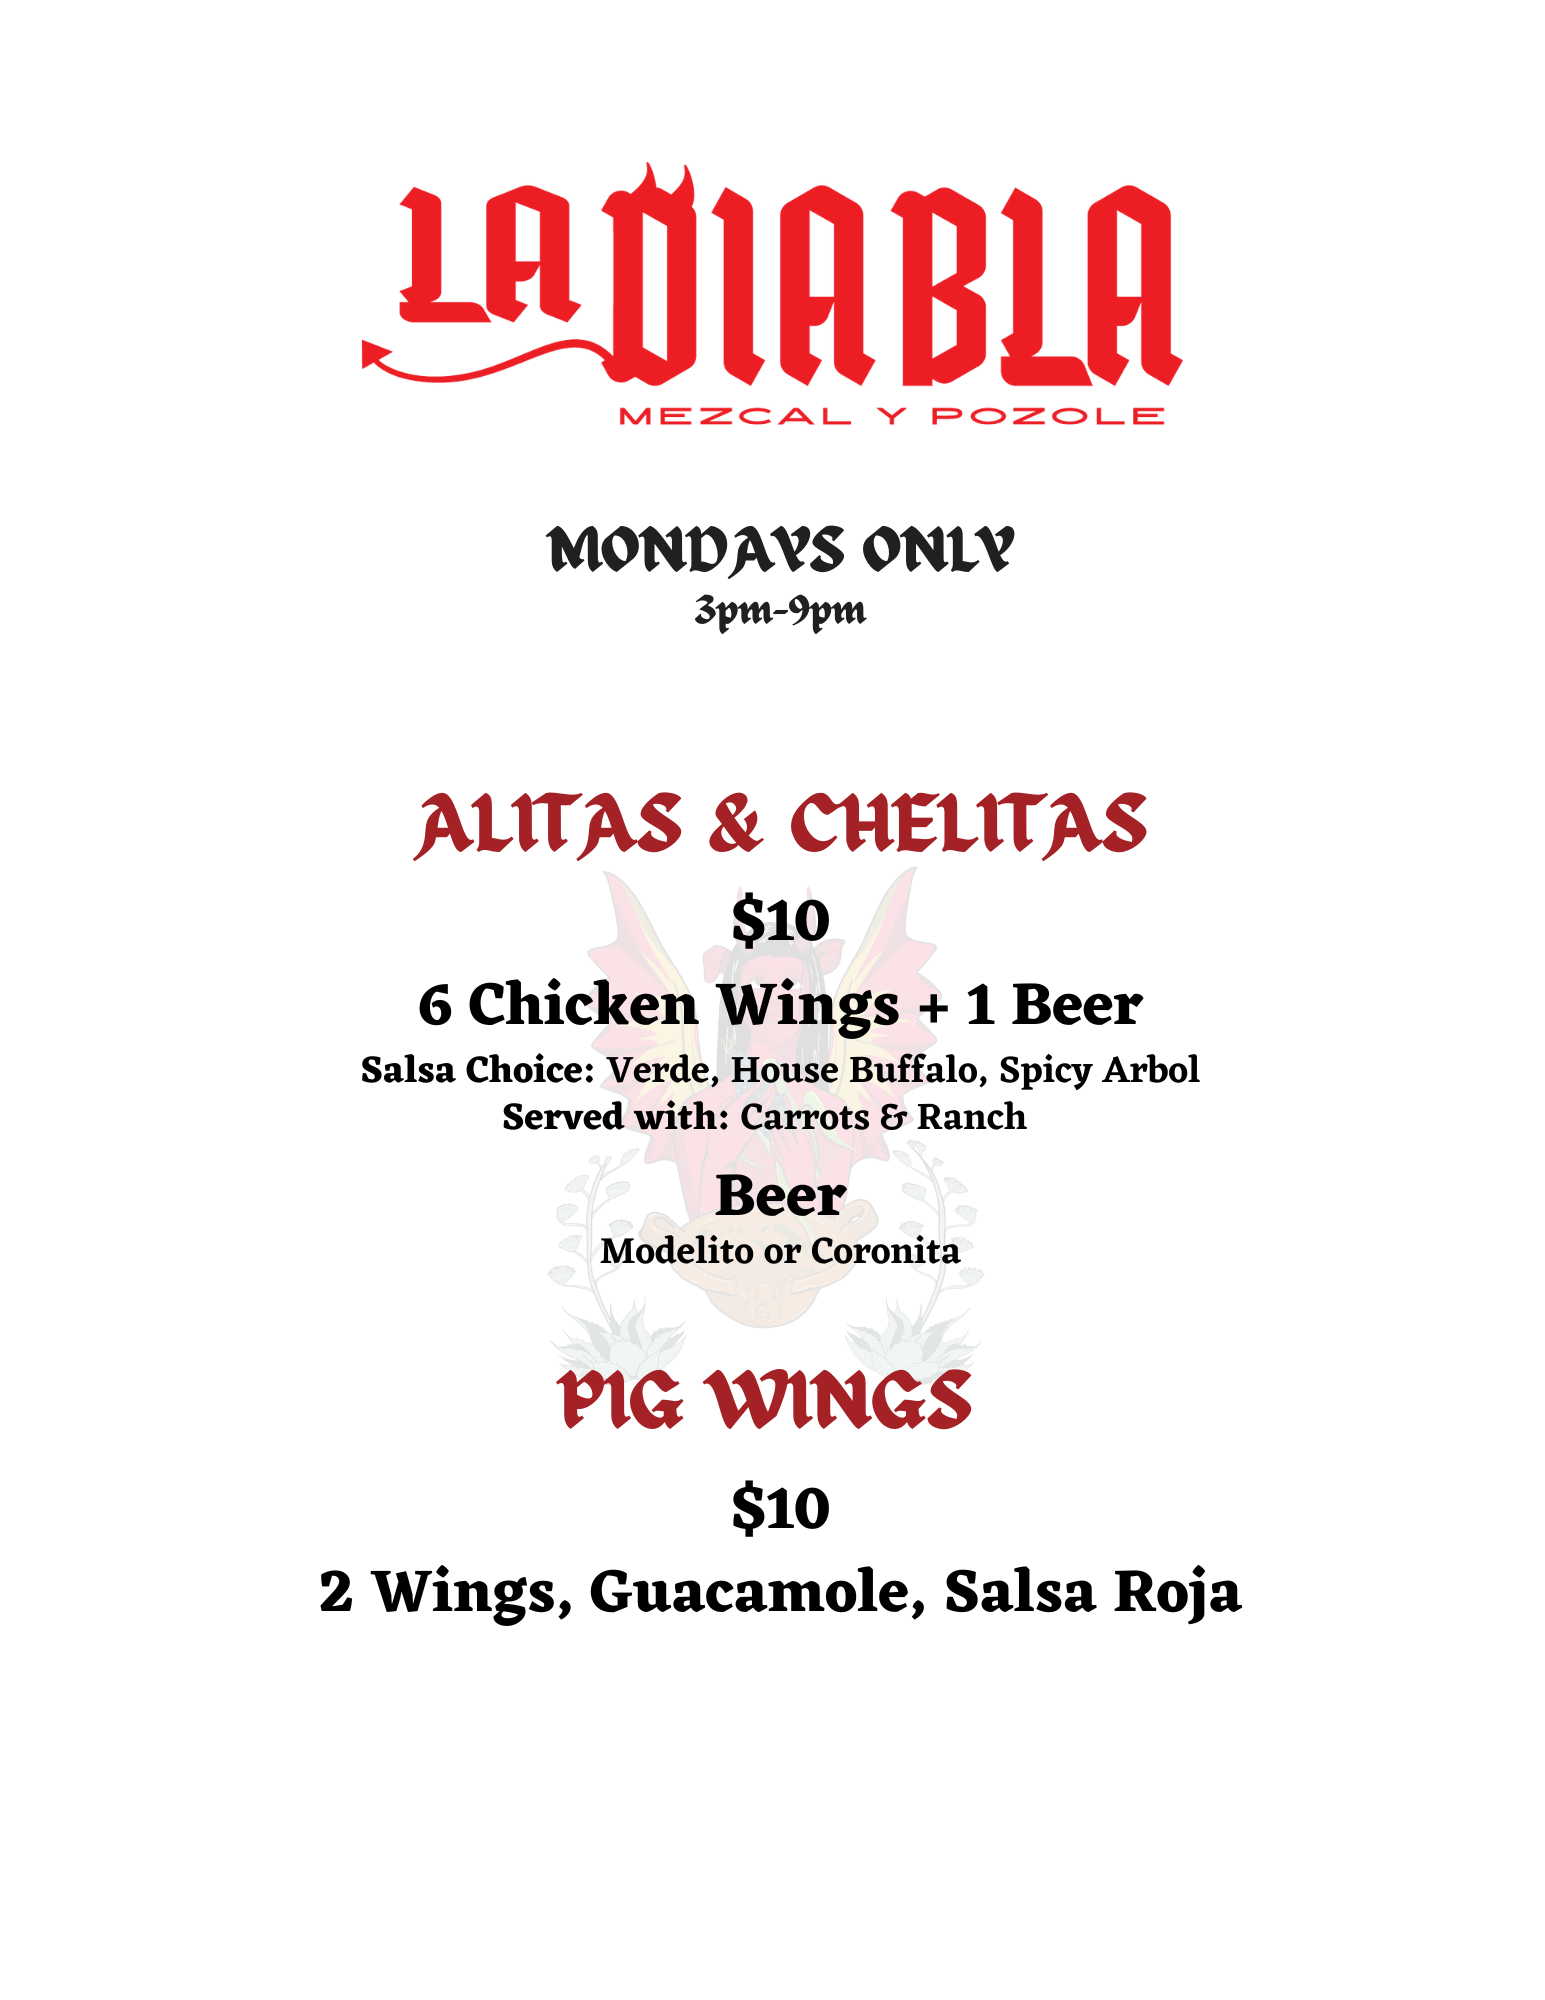 Bugs Are the Star of the Menu at La Diabla This Week